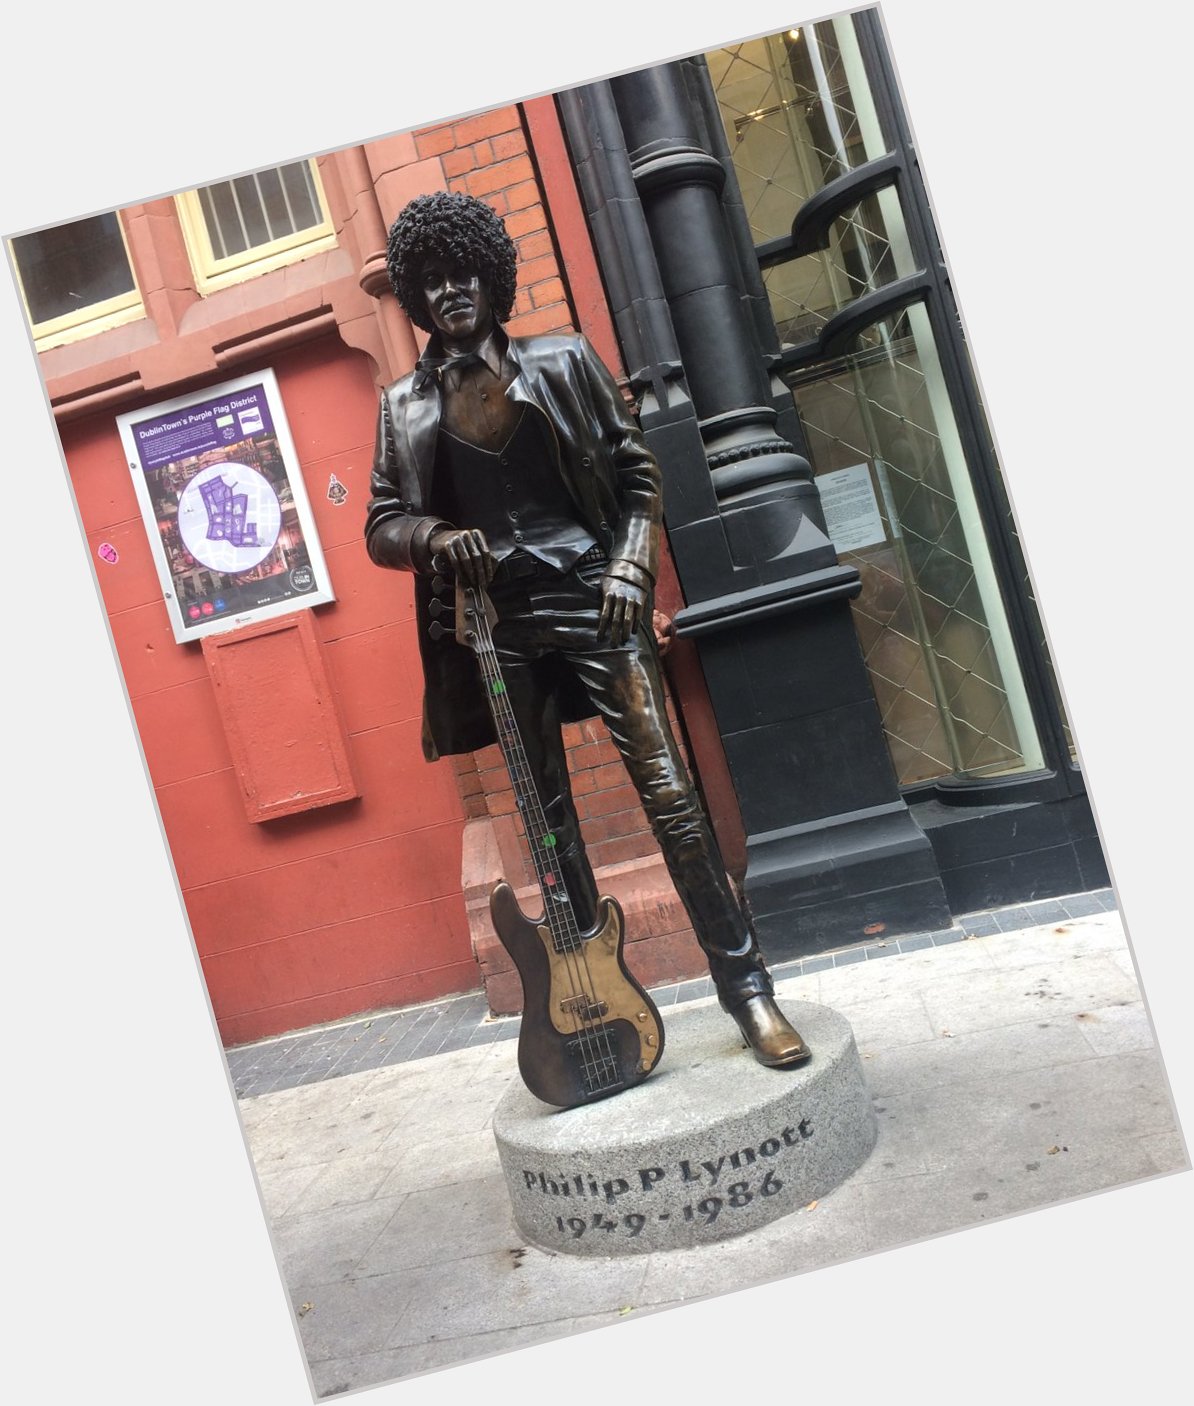 One of my pilgrimage pics from last year\s travels. Happy birthday Phil Lynott! 